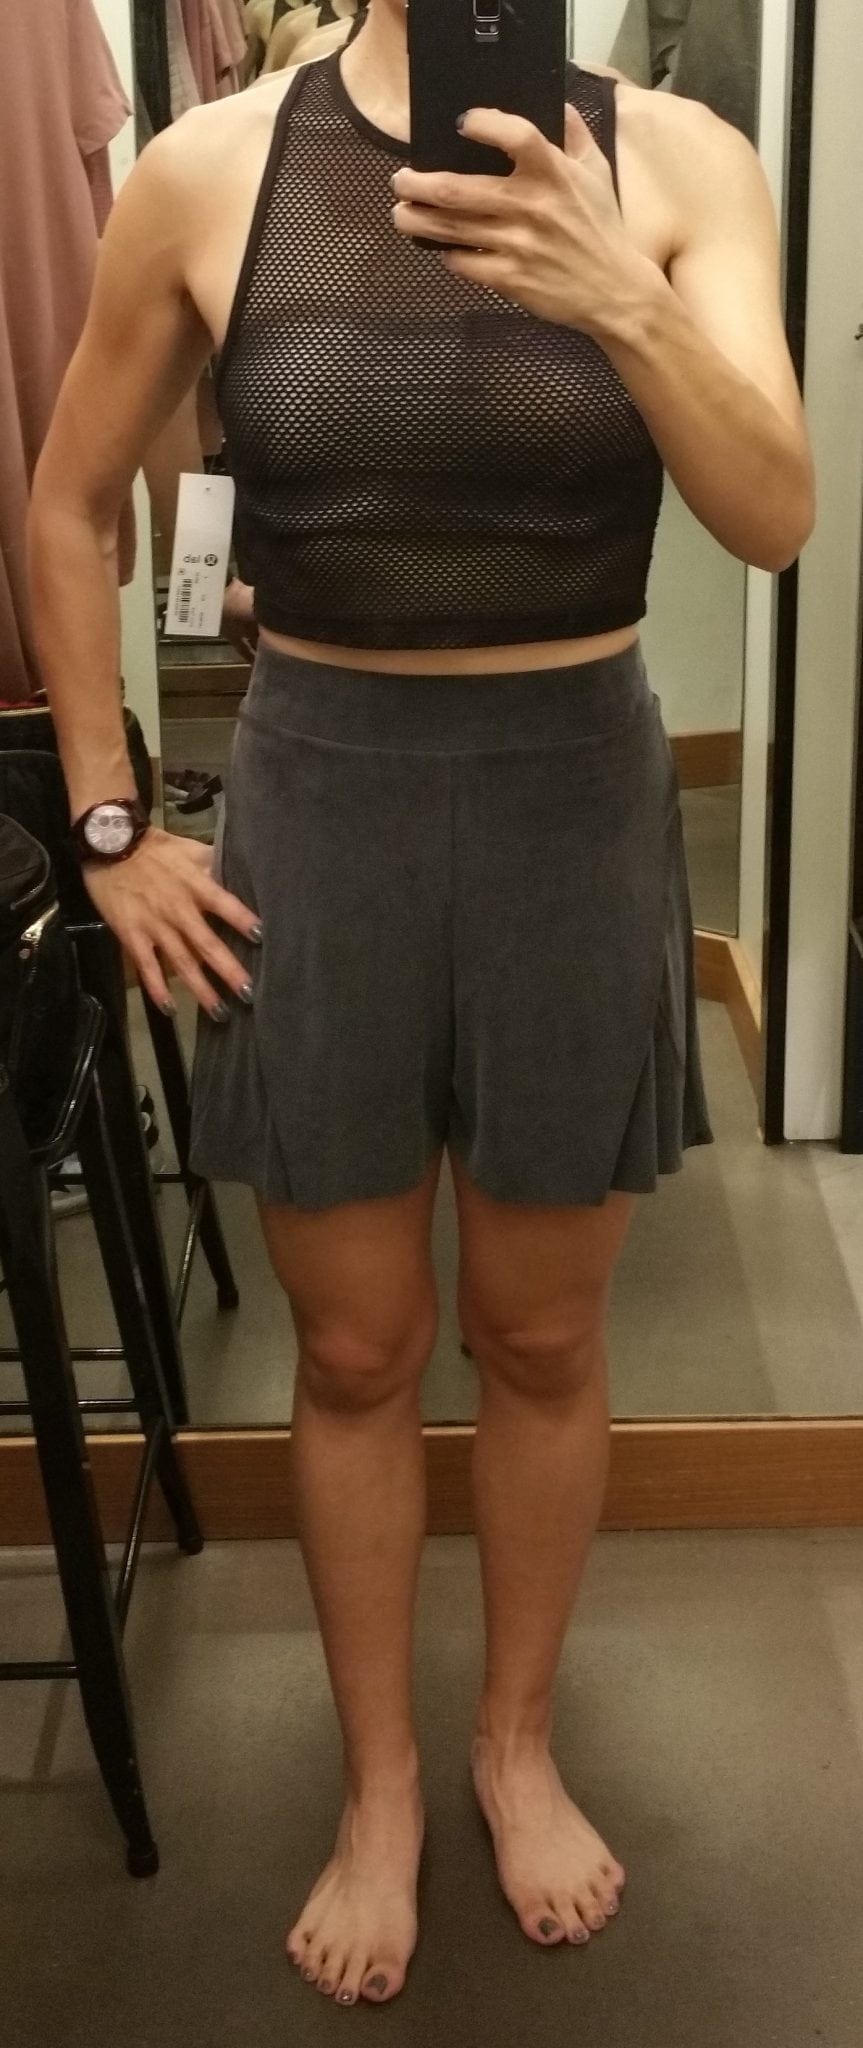 LULULEMON FIT REVIEW: LULULEMON LAB CAPSULE - SWERVE TIGHT, UNION TANK,  MITRA PARKA, ENFOLD SHORT AND ATLIN DRESS - The Sweat Edit